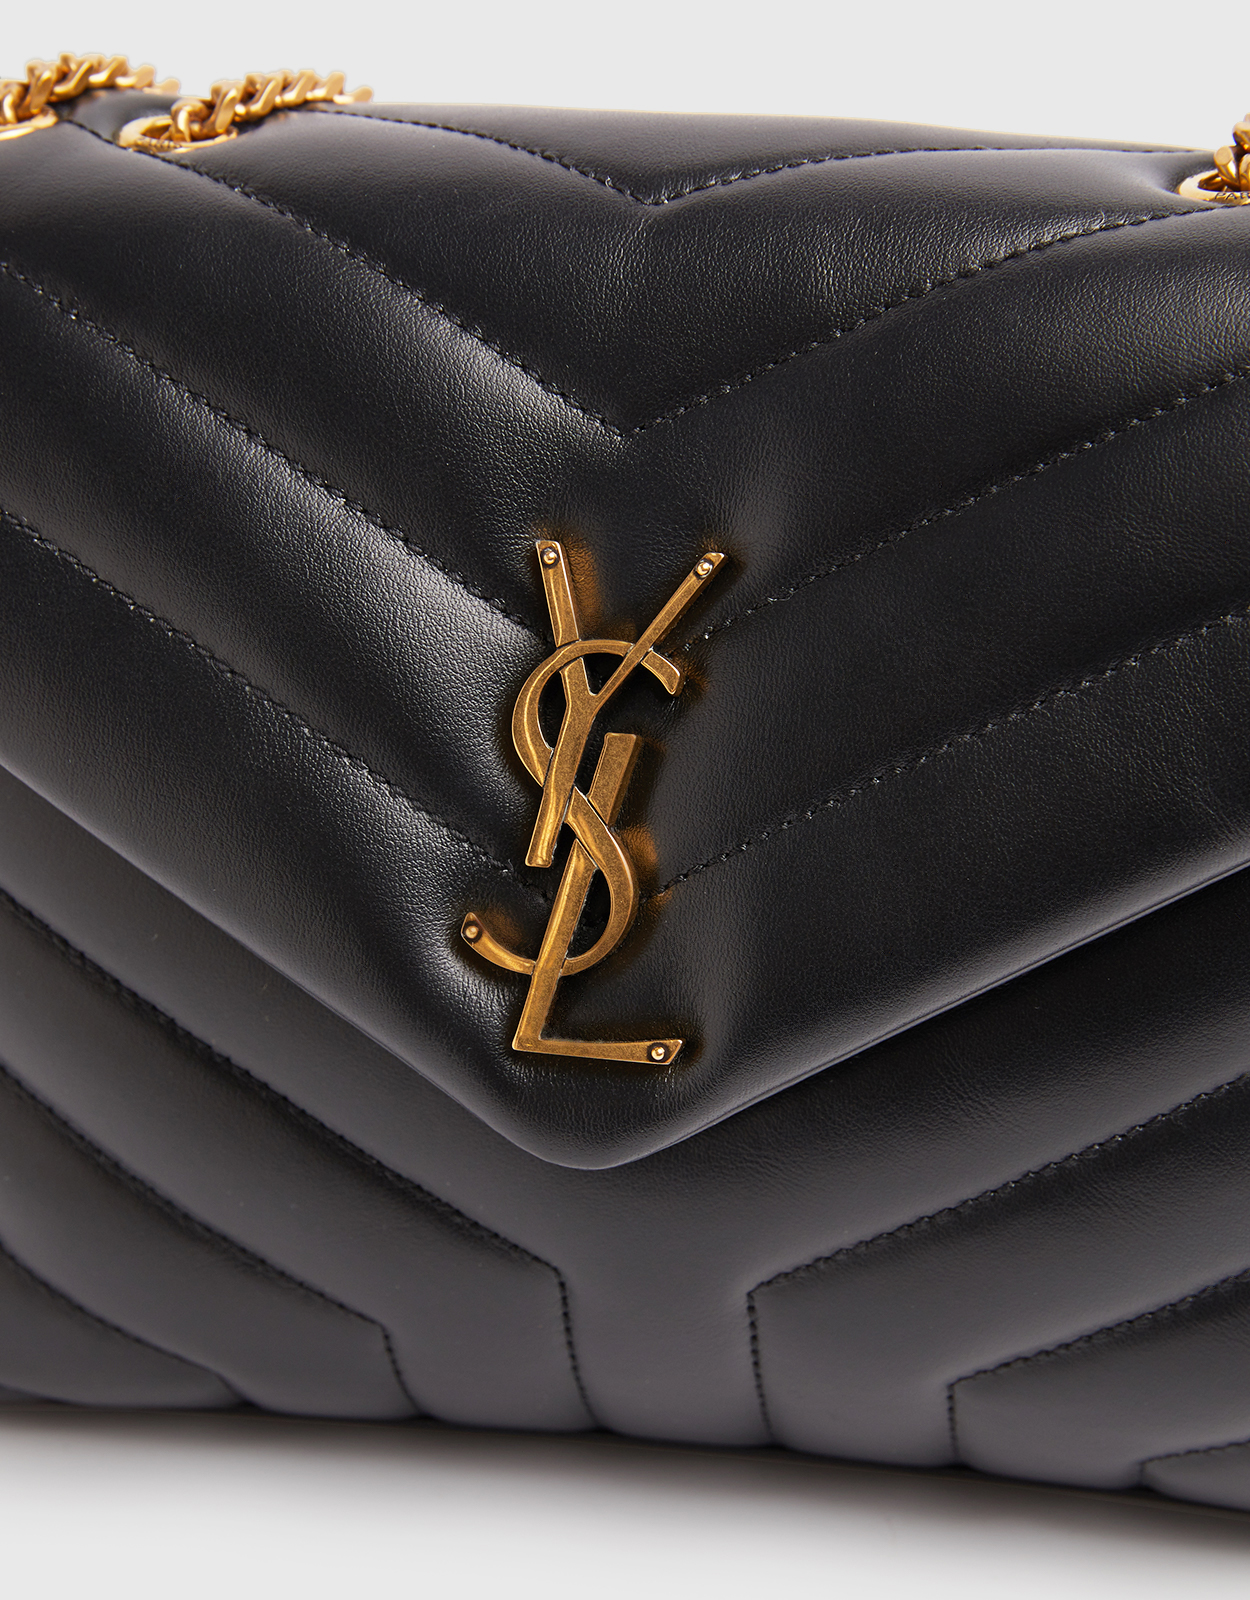 FIRST IMPRESSION OF YSL MINI LOULOU/ WHAT FITS/ MINI LOULOU VS TOY